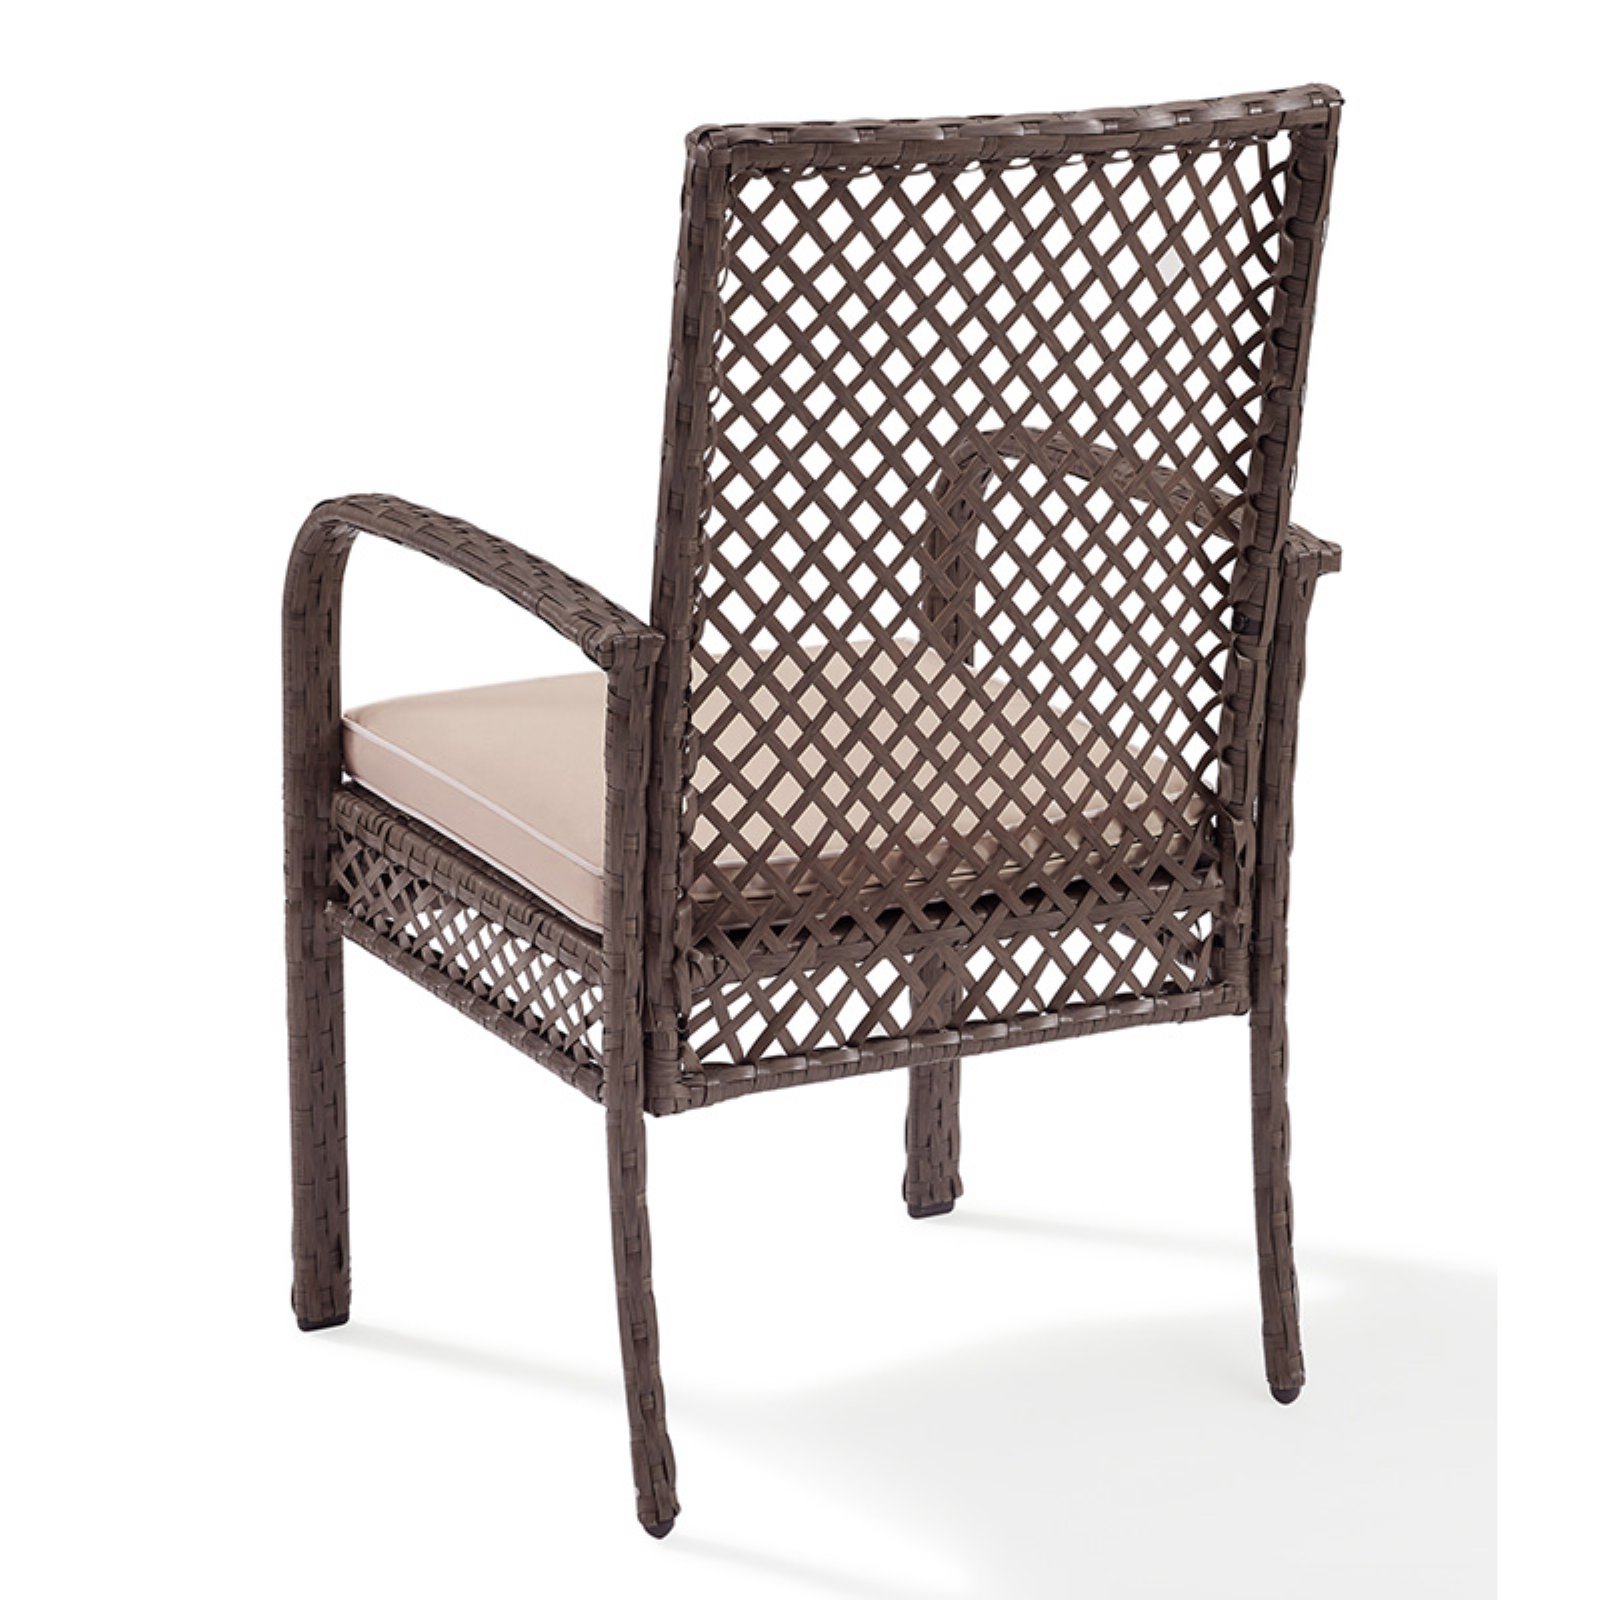 Crosley Furniture Tribeca Wicker Patio Dining Arm Chair in Driftwood - image 2 of 6